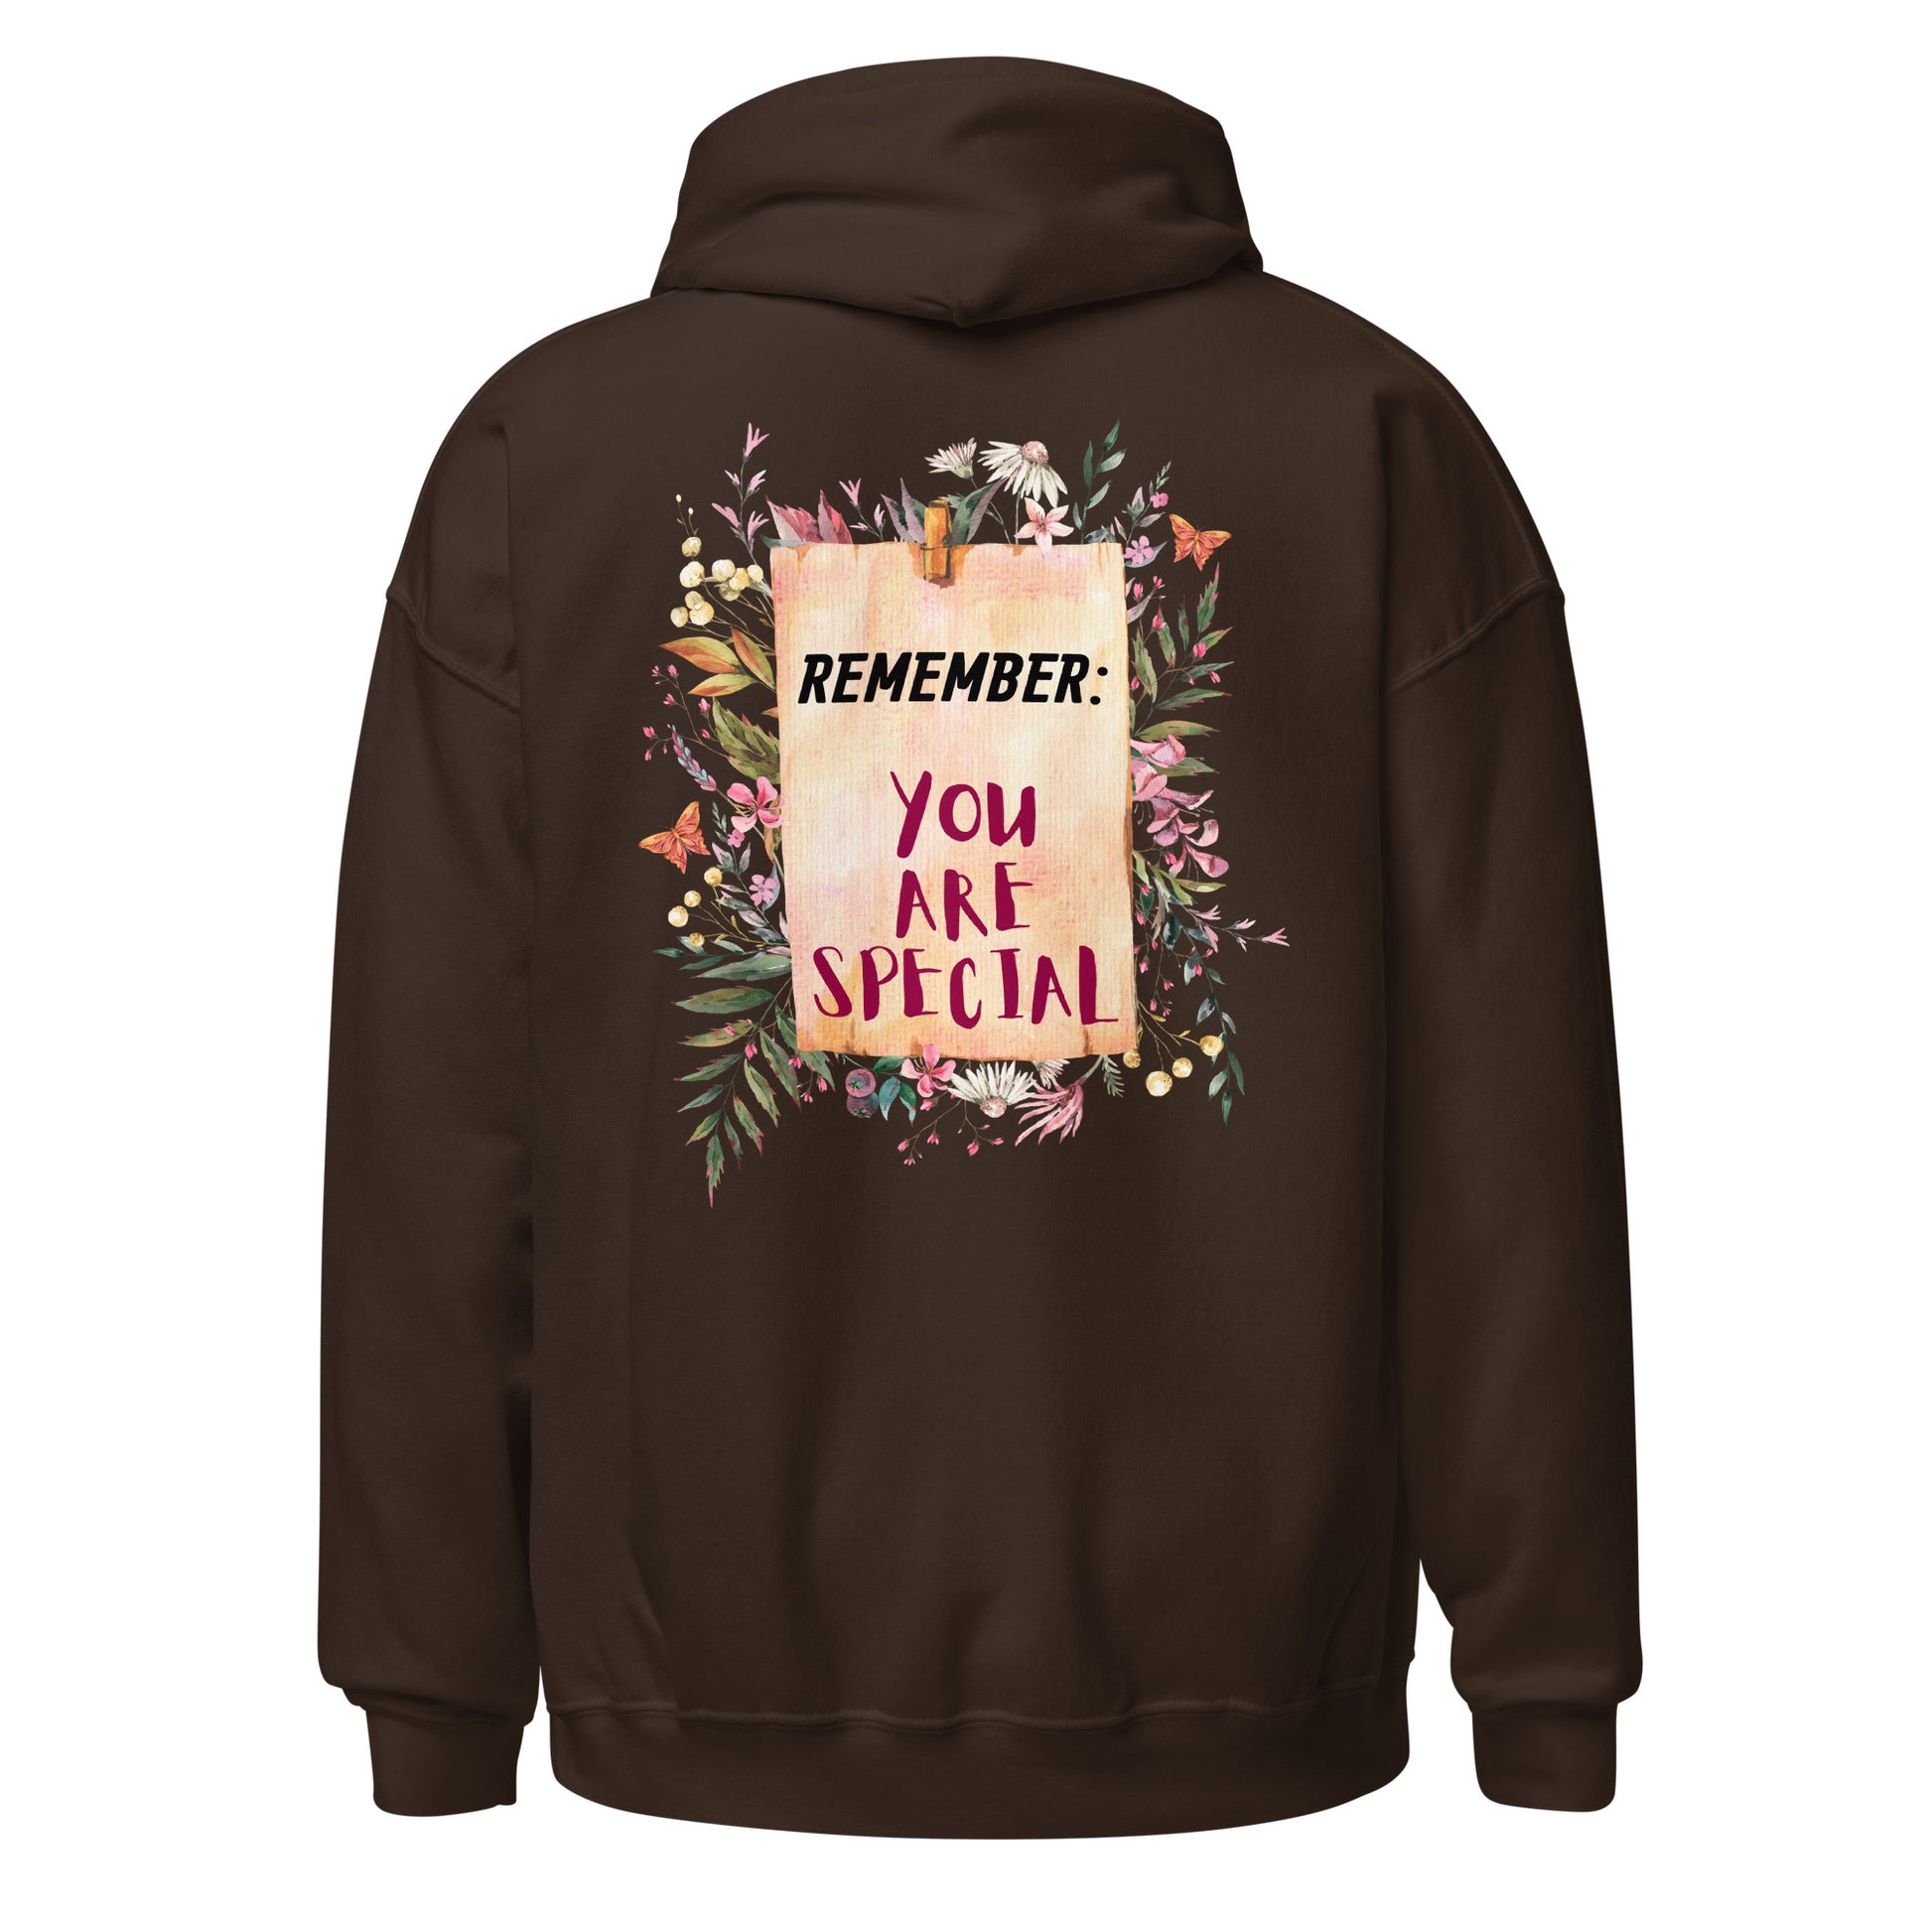 Inspirational Pullover Hoodie featuring the powerful affirmation, "Remember: You Are Special." The vintage-inspired design, featuring a floral botanical reminder note, adds a touch of timeless elegance to their attire - dark chocolate hoodie